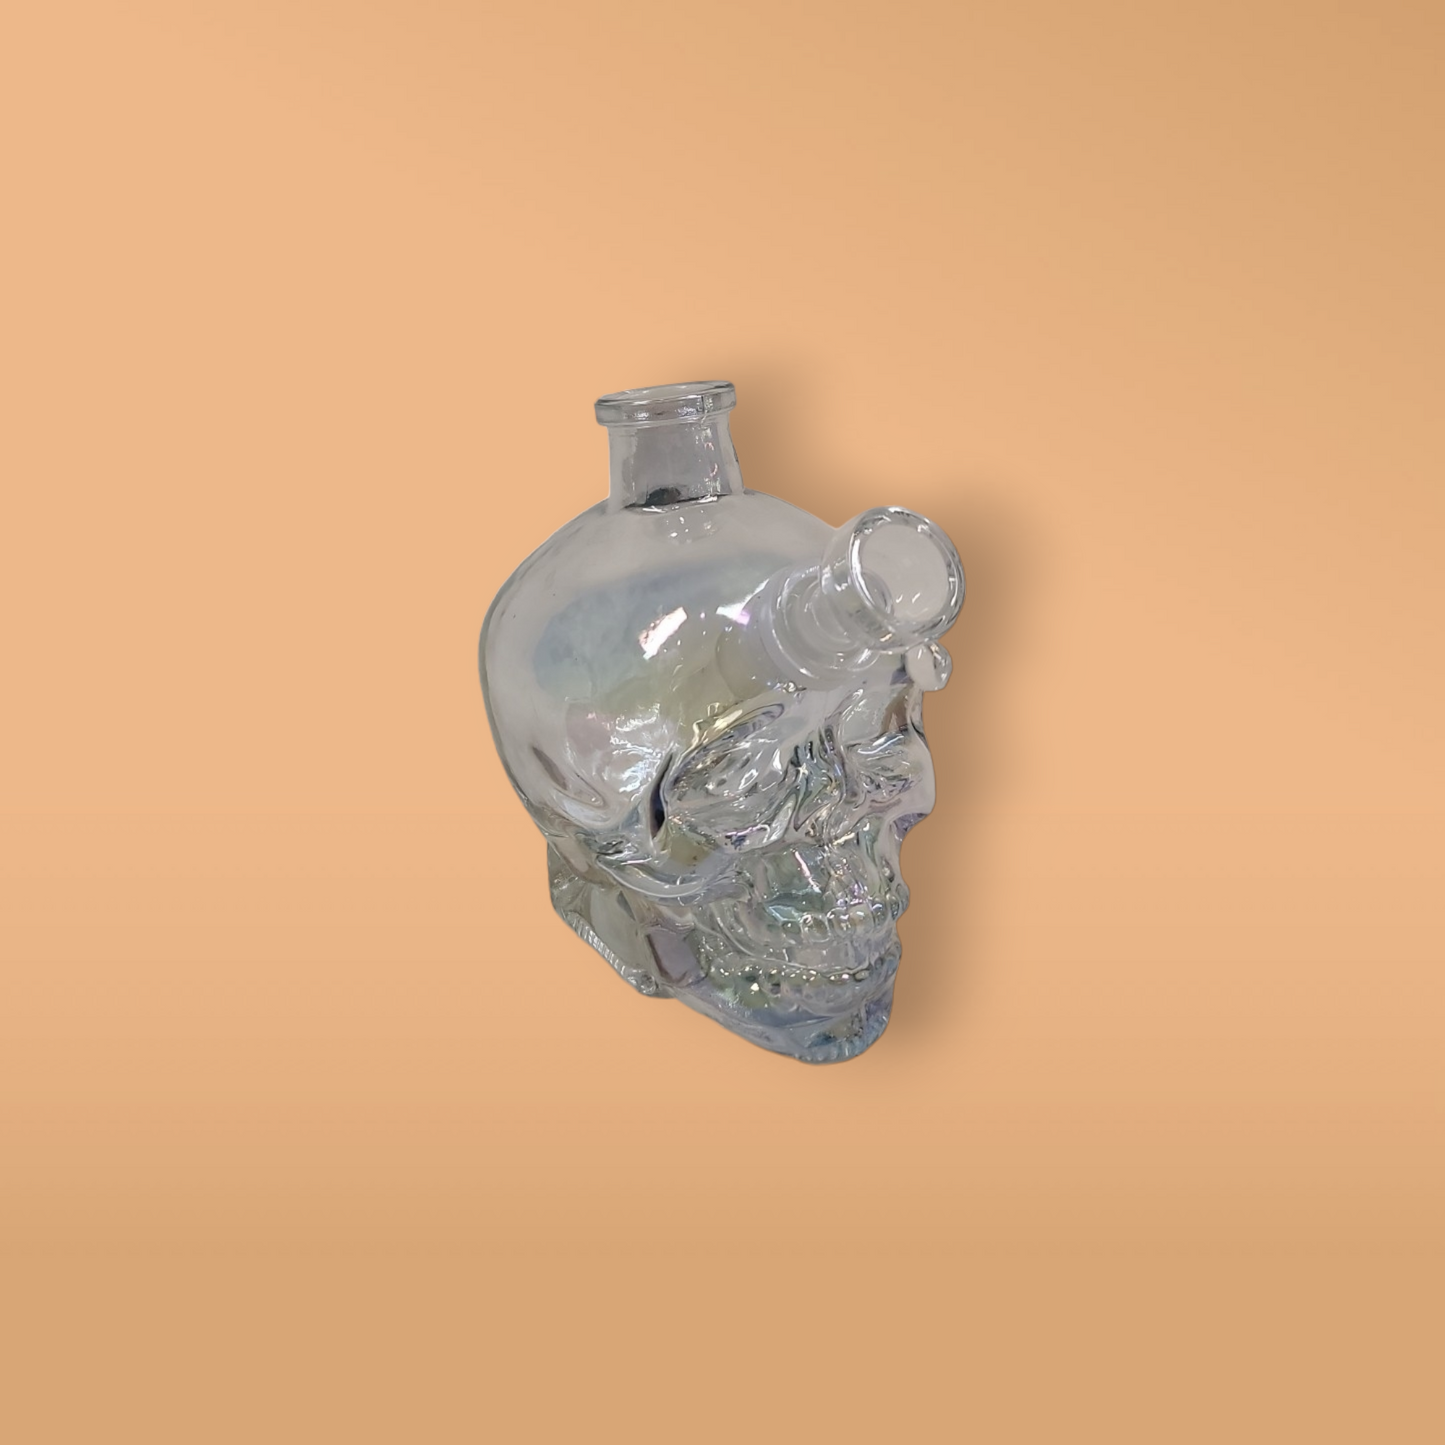 Deluxe Clear Iridescent Skull (with banger, carb cap, bowl piece, and mouth extension)